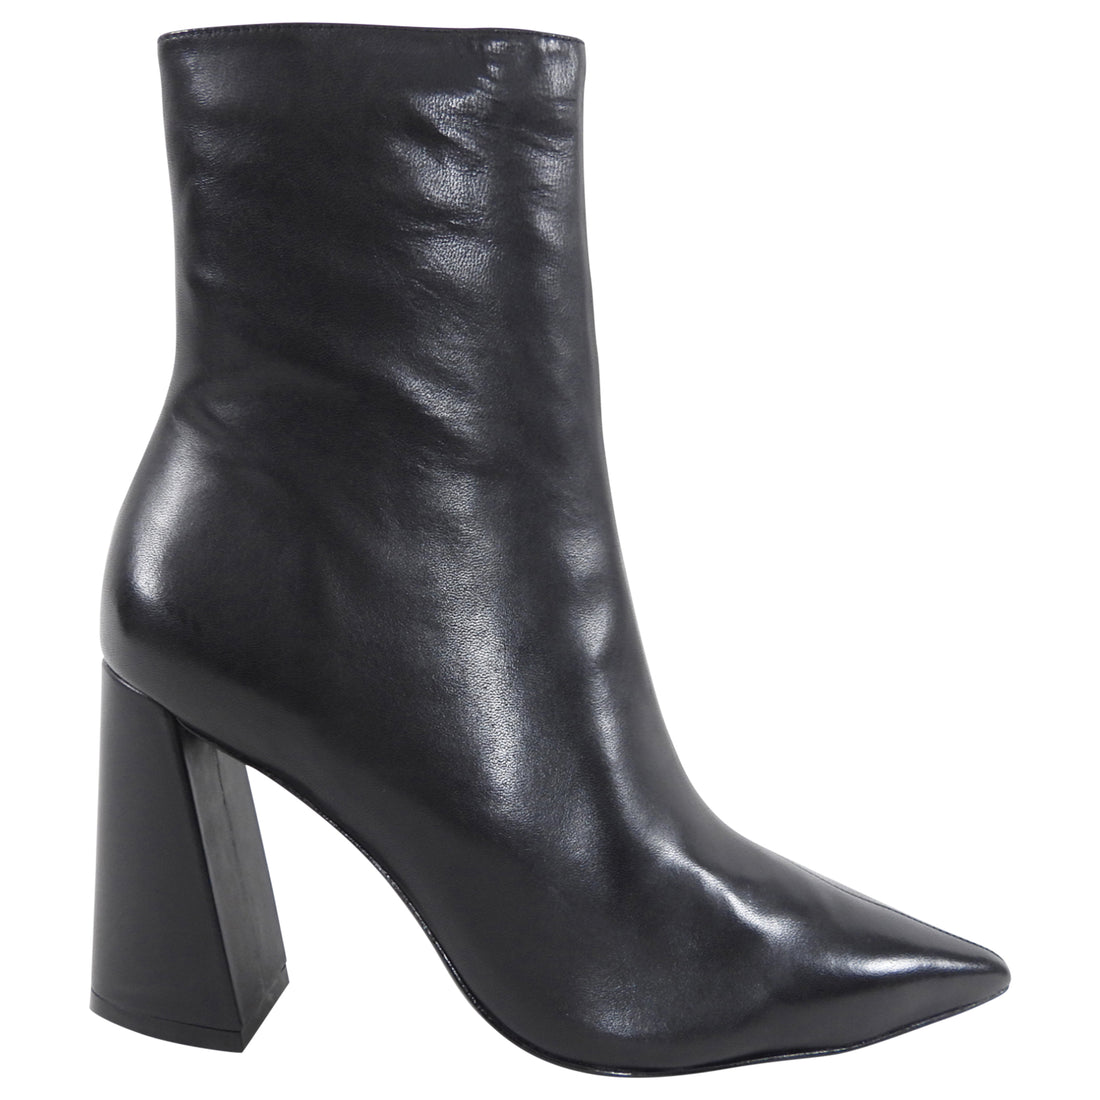 Black Suede Studio Black Leather Ankle Boot - 7